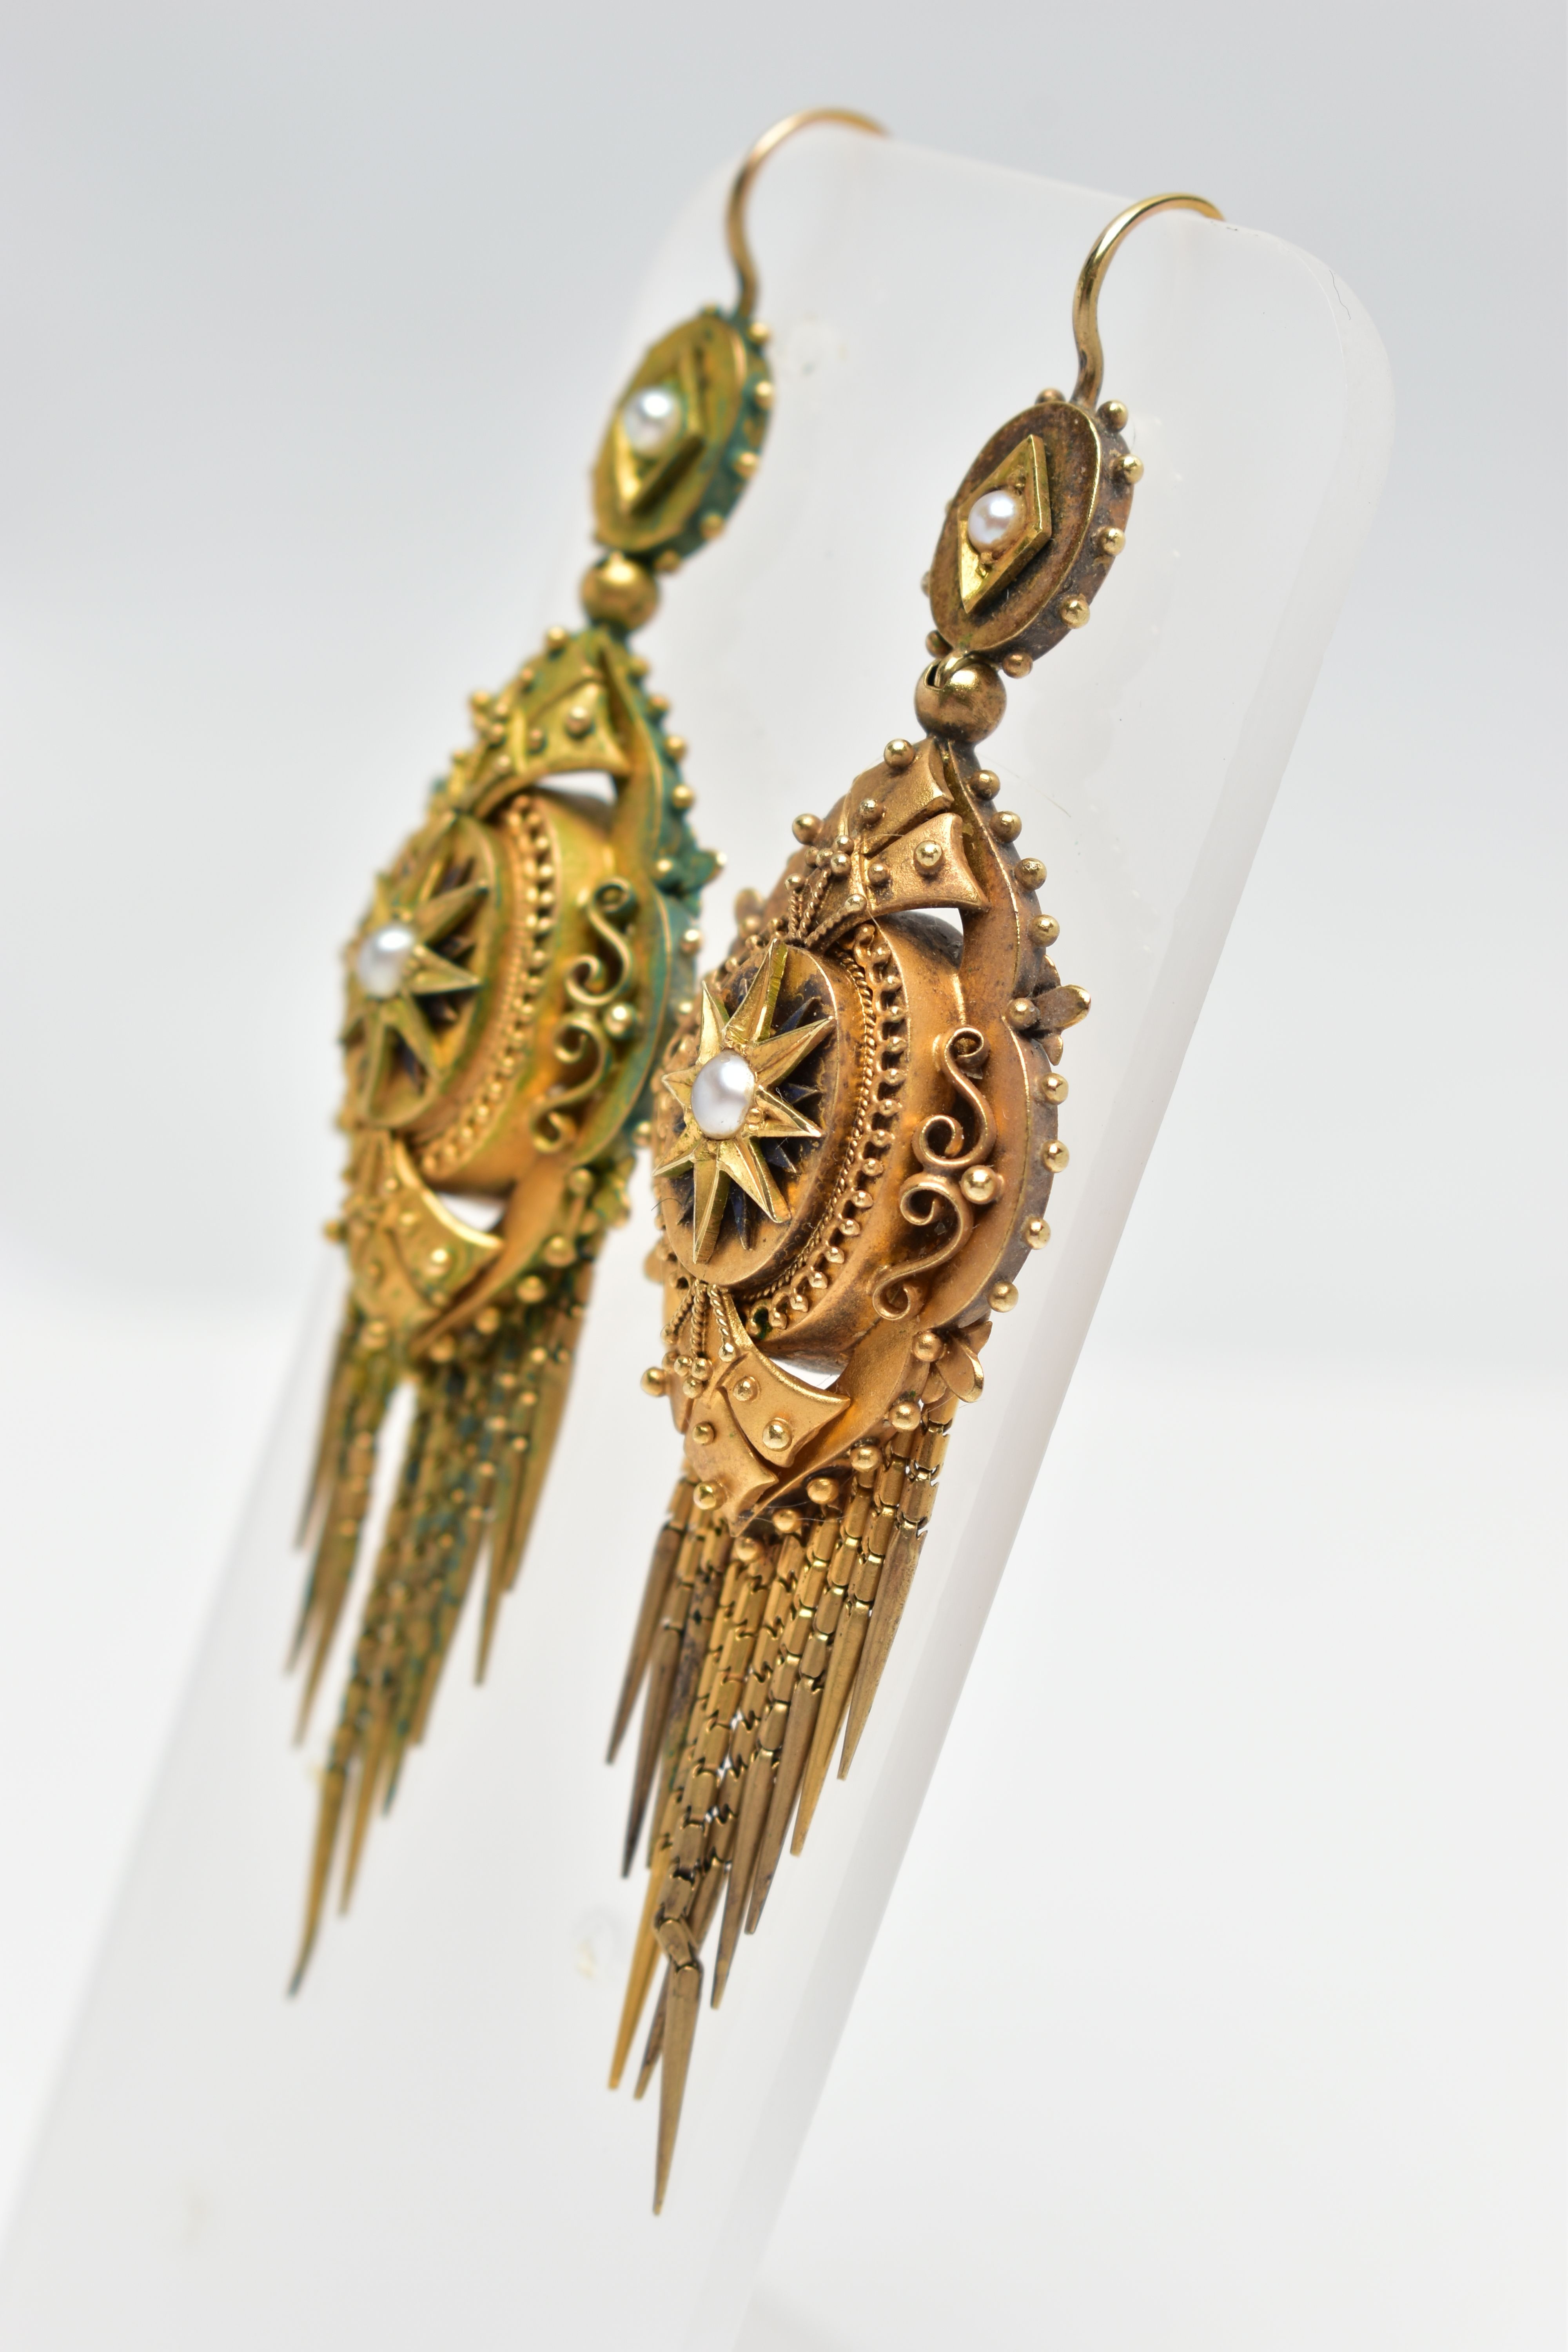 A PAIR OF MID 19TH CENTURY ETRUSCAN STYLE EARRINGS, yellow metal Victorian drop earrings, fish - Image 3 of 4